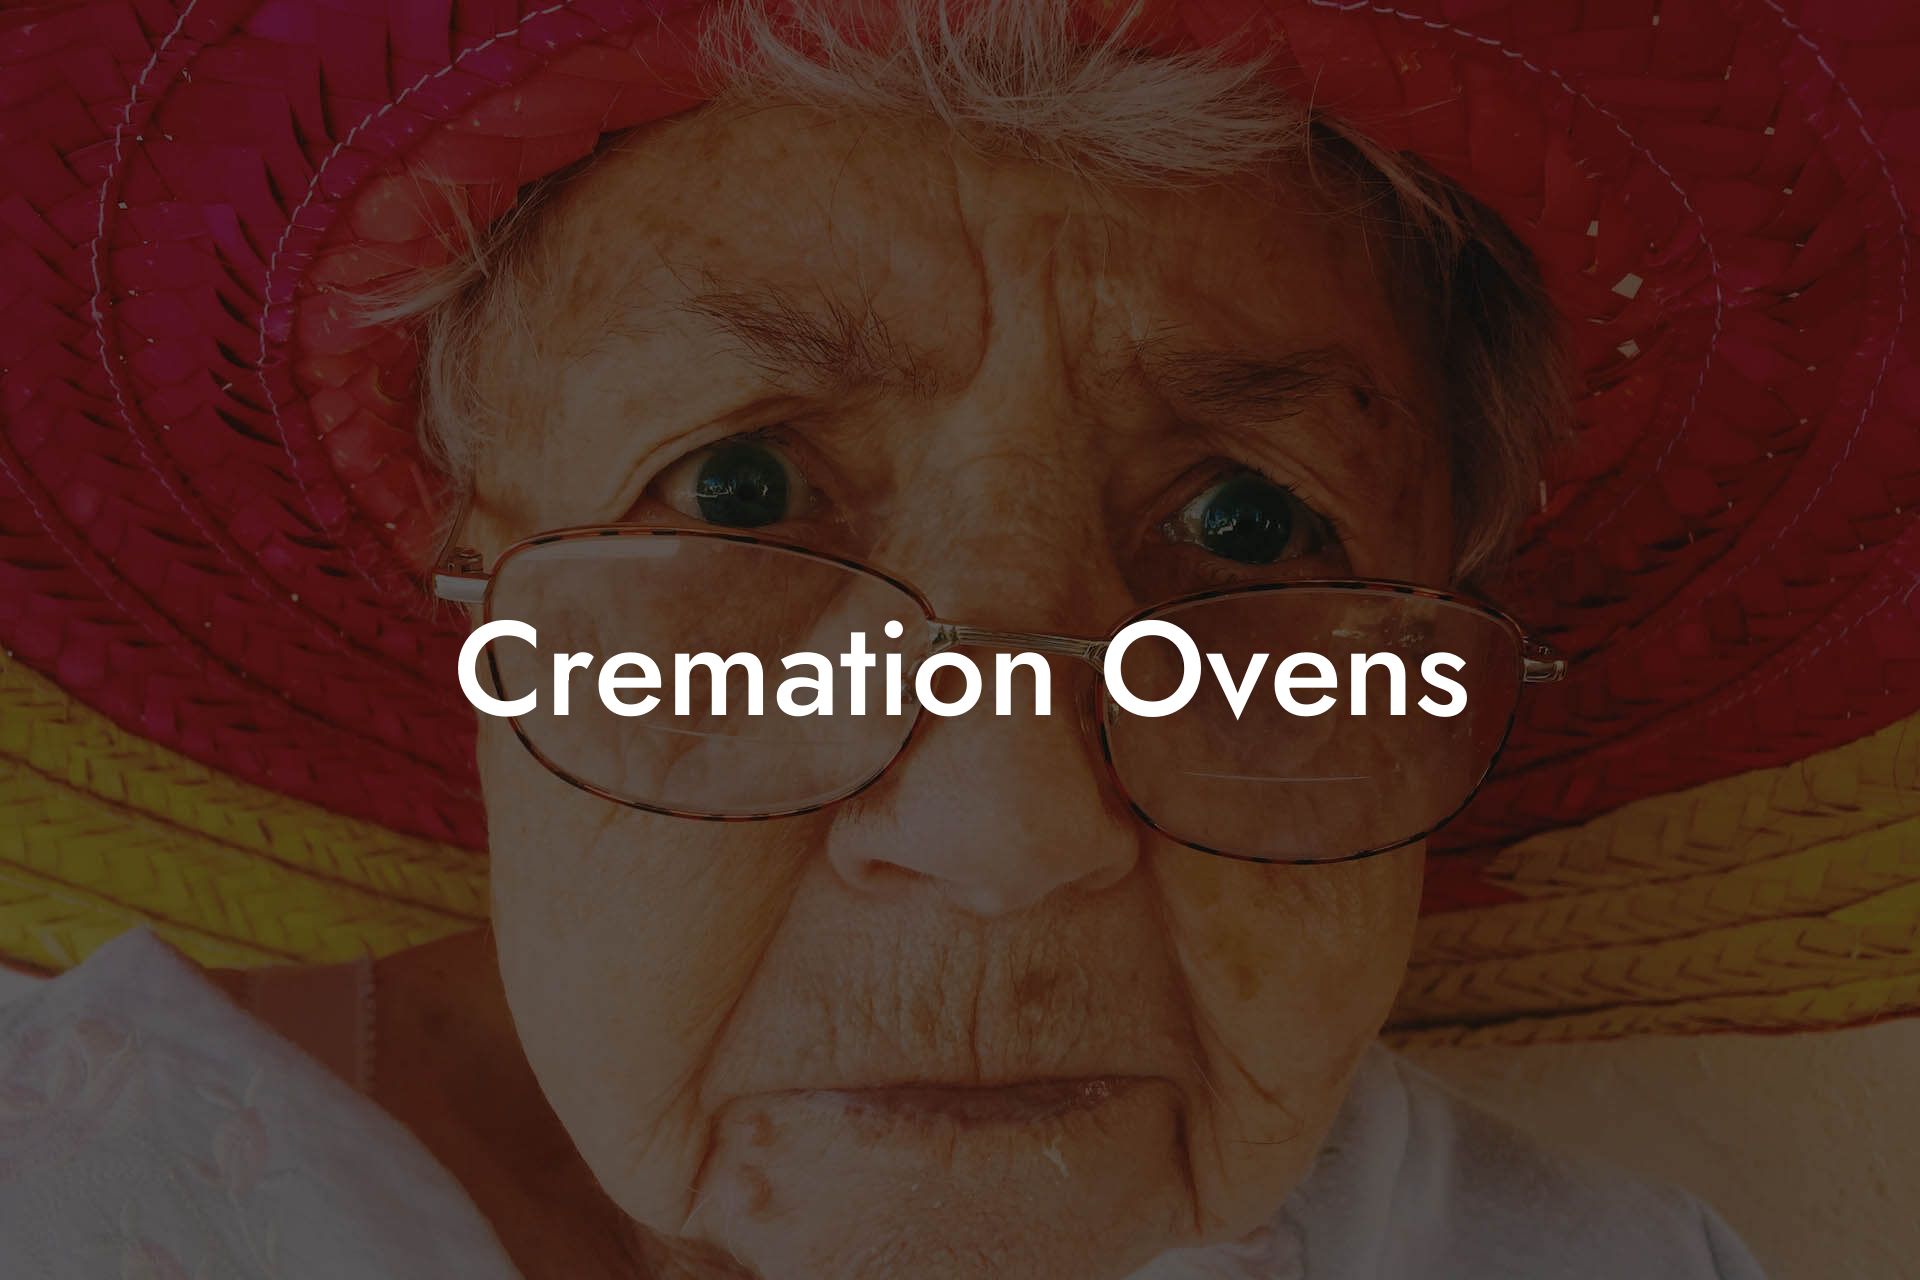 Cremation Ovens